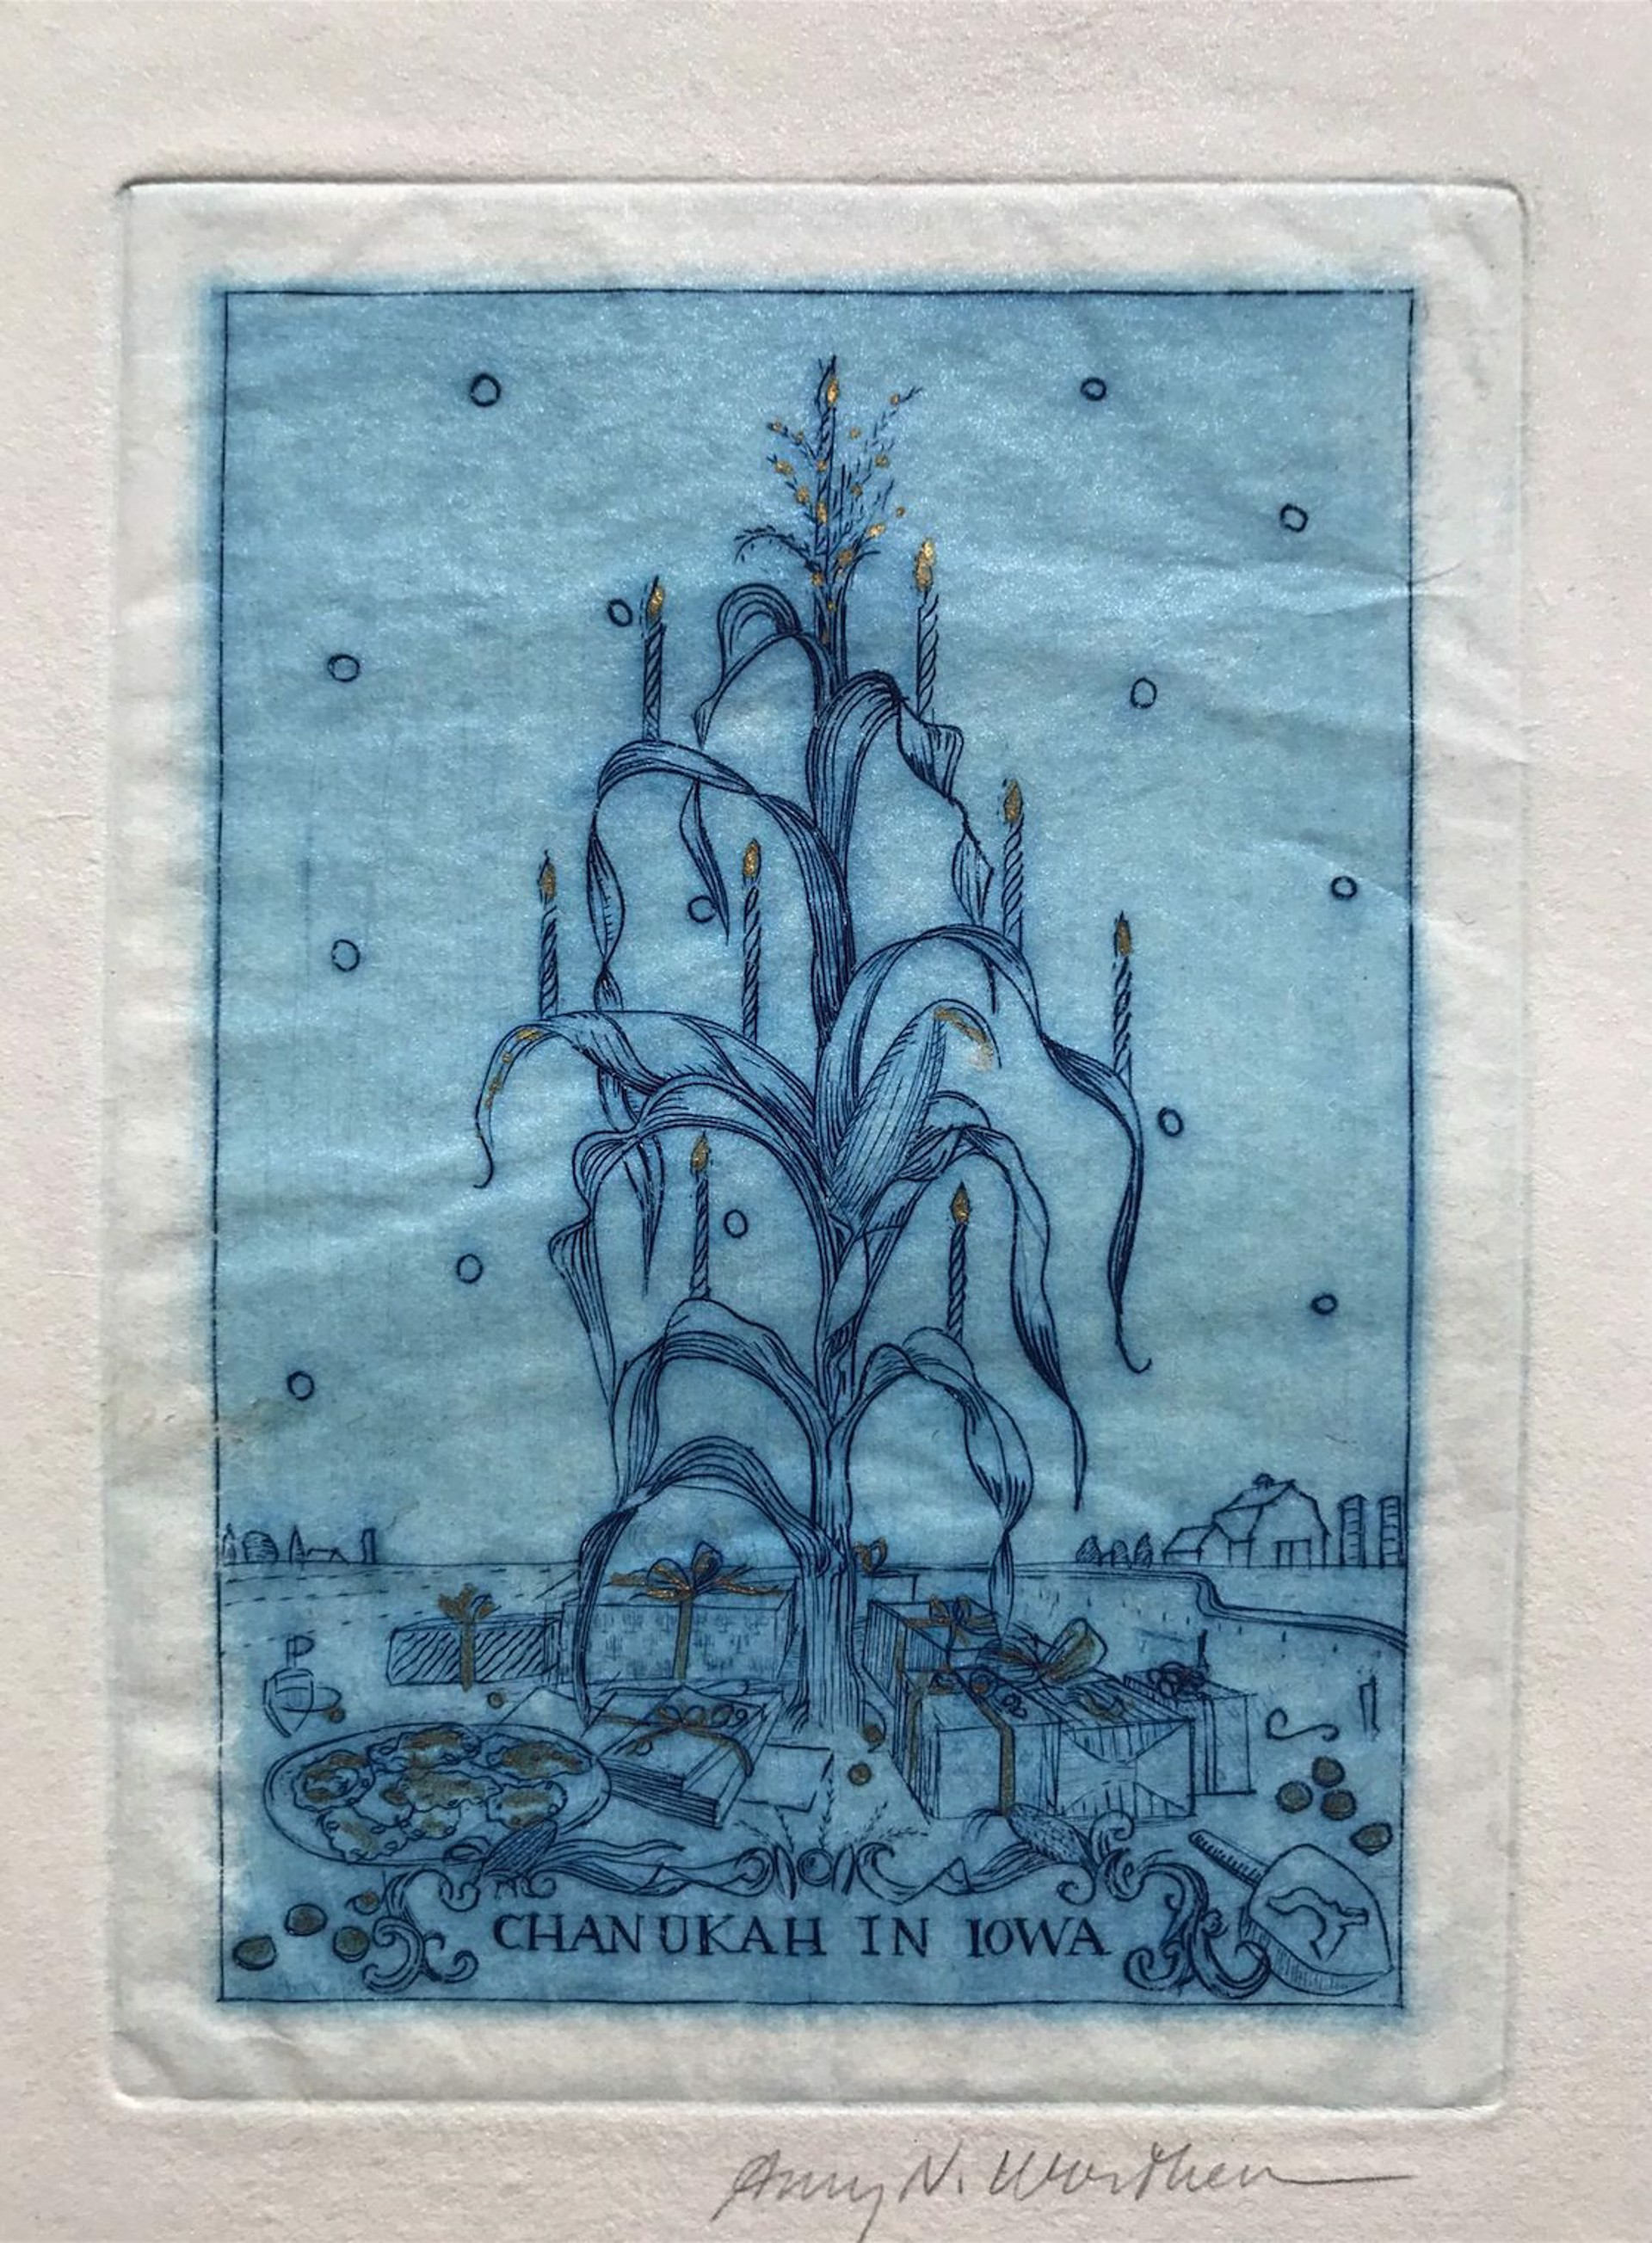 Chanukah in Iowa (white paper, blue ink) by Amy Worthen